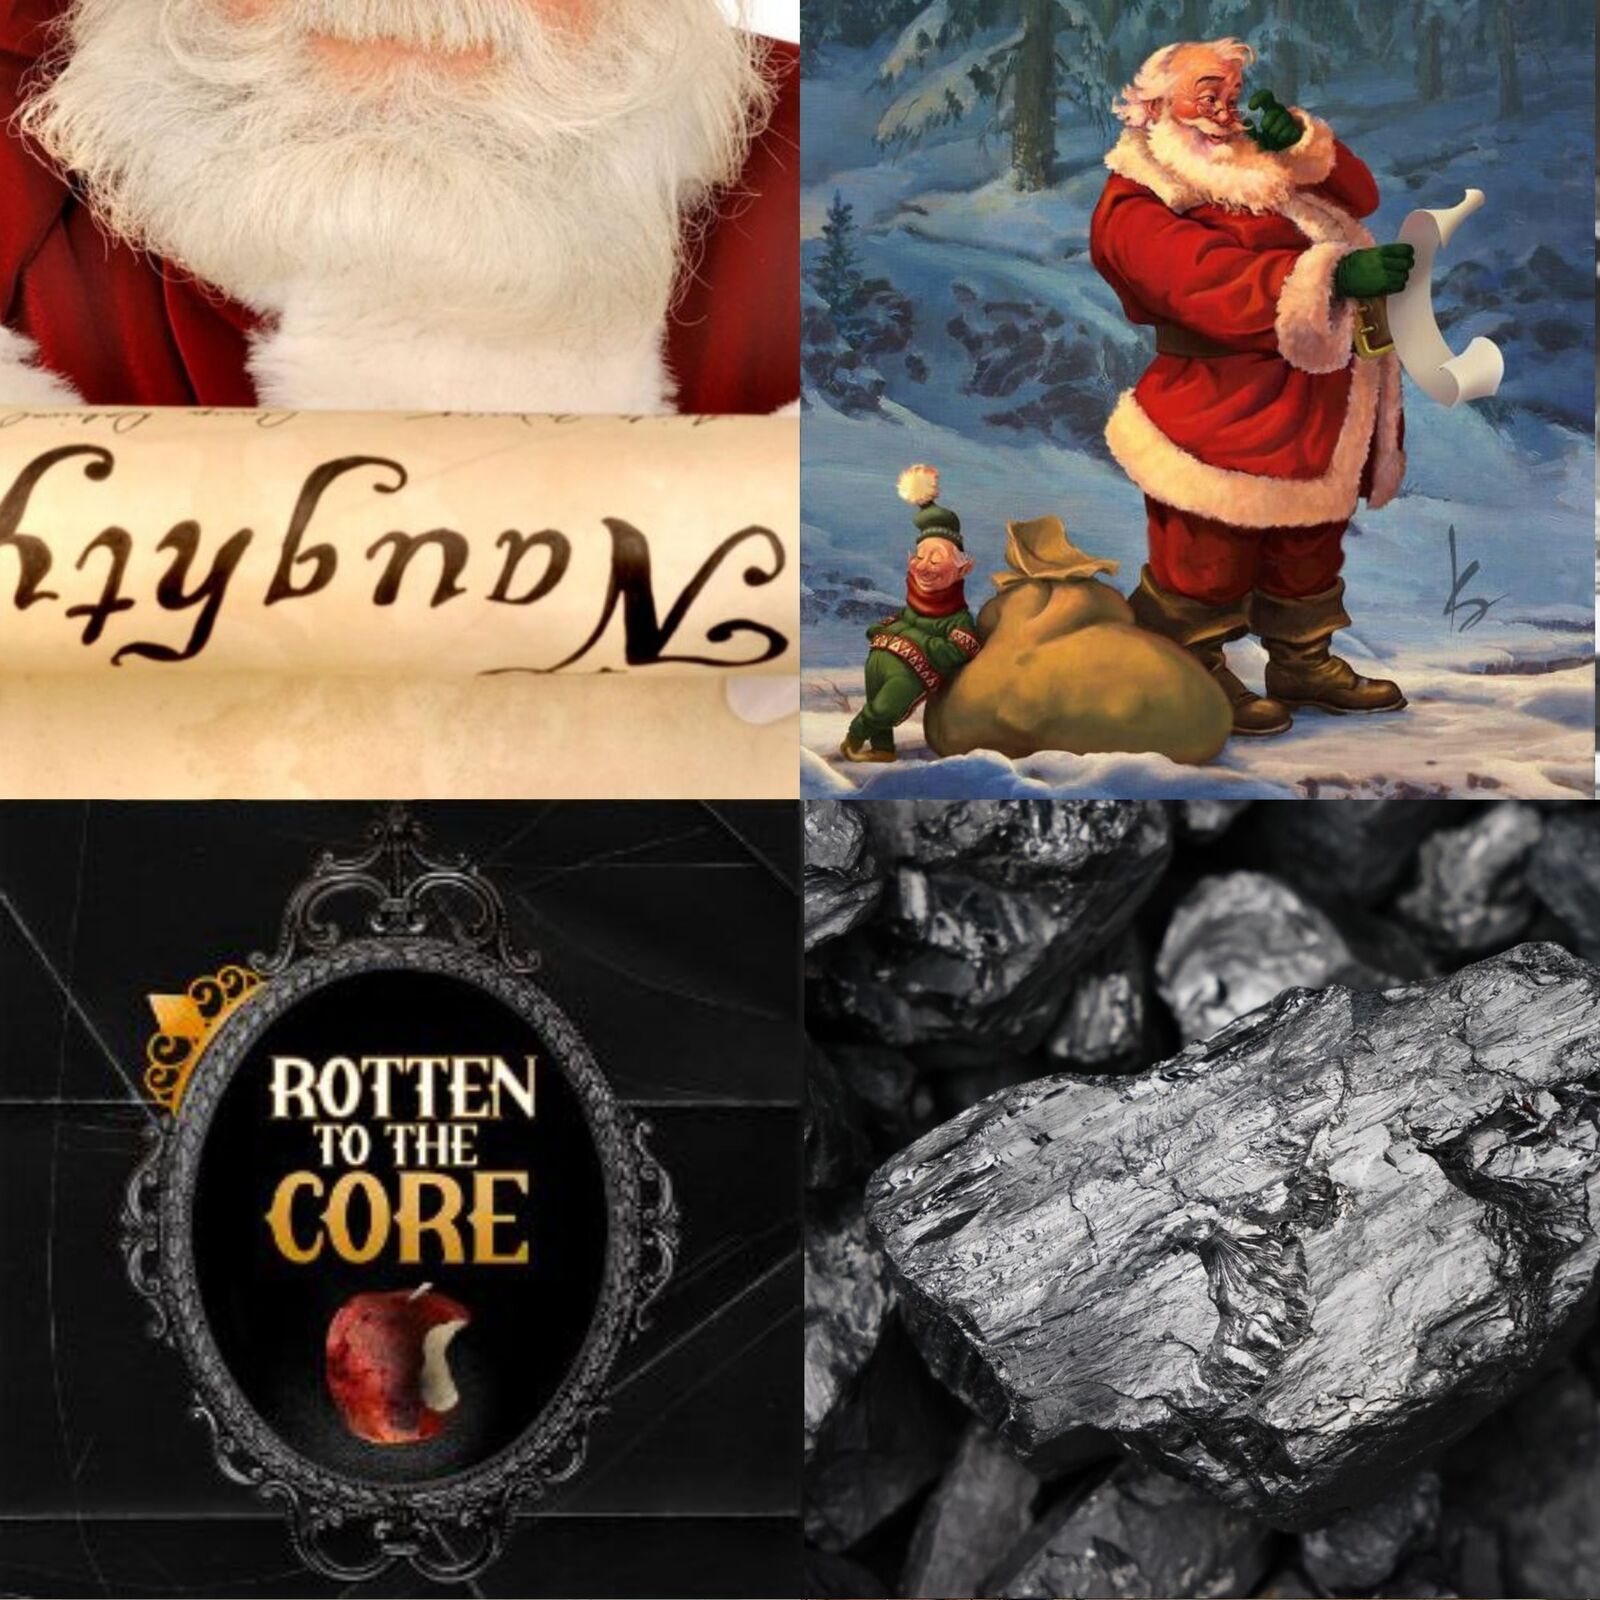 Episode 24: The Naughty List of History